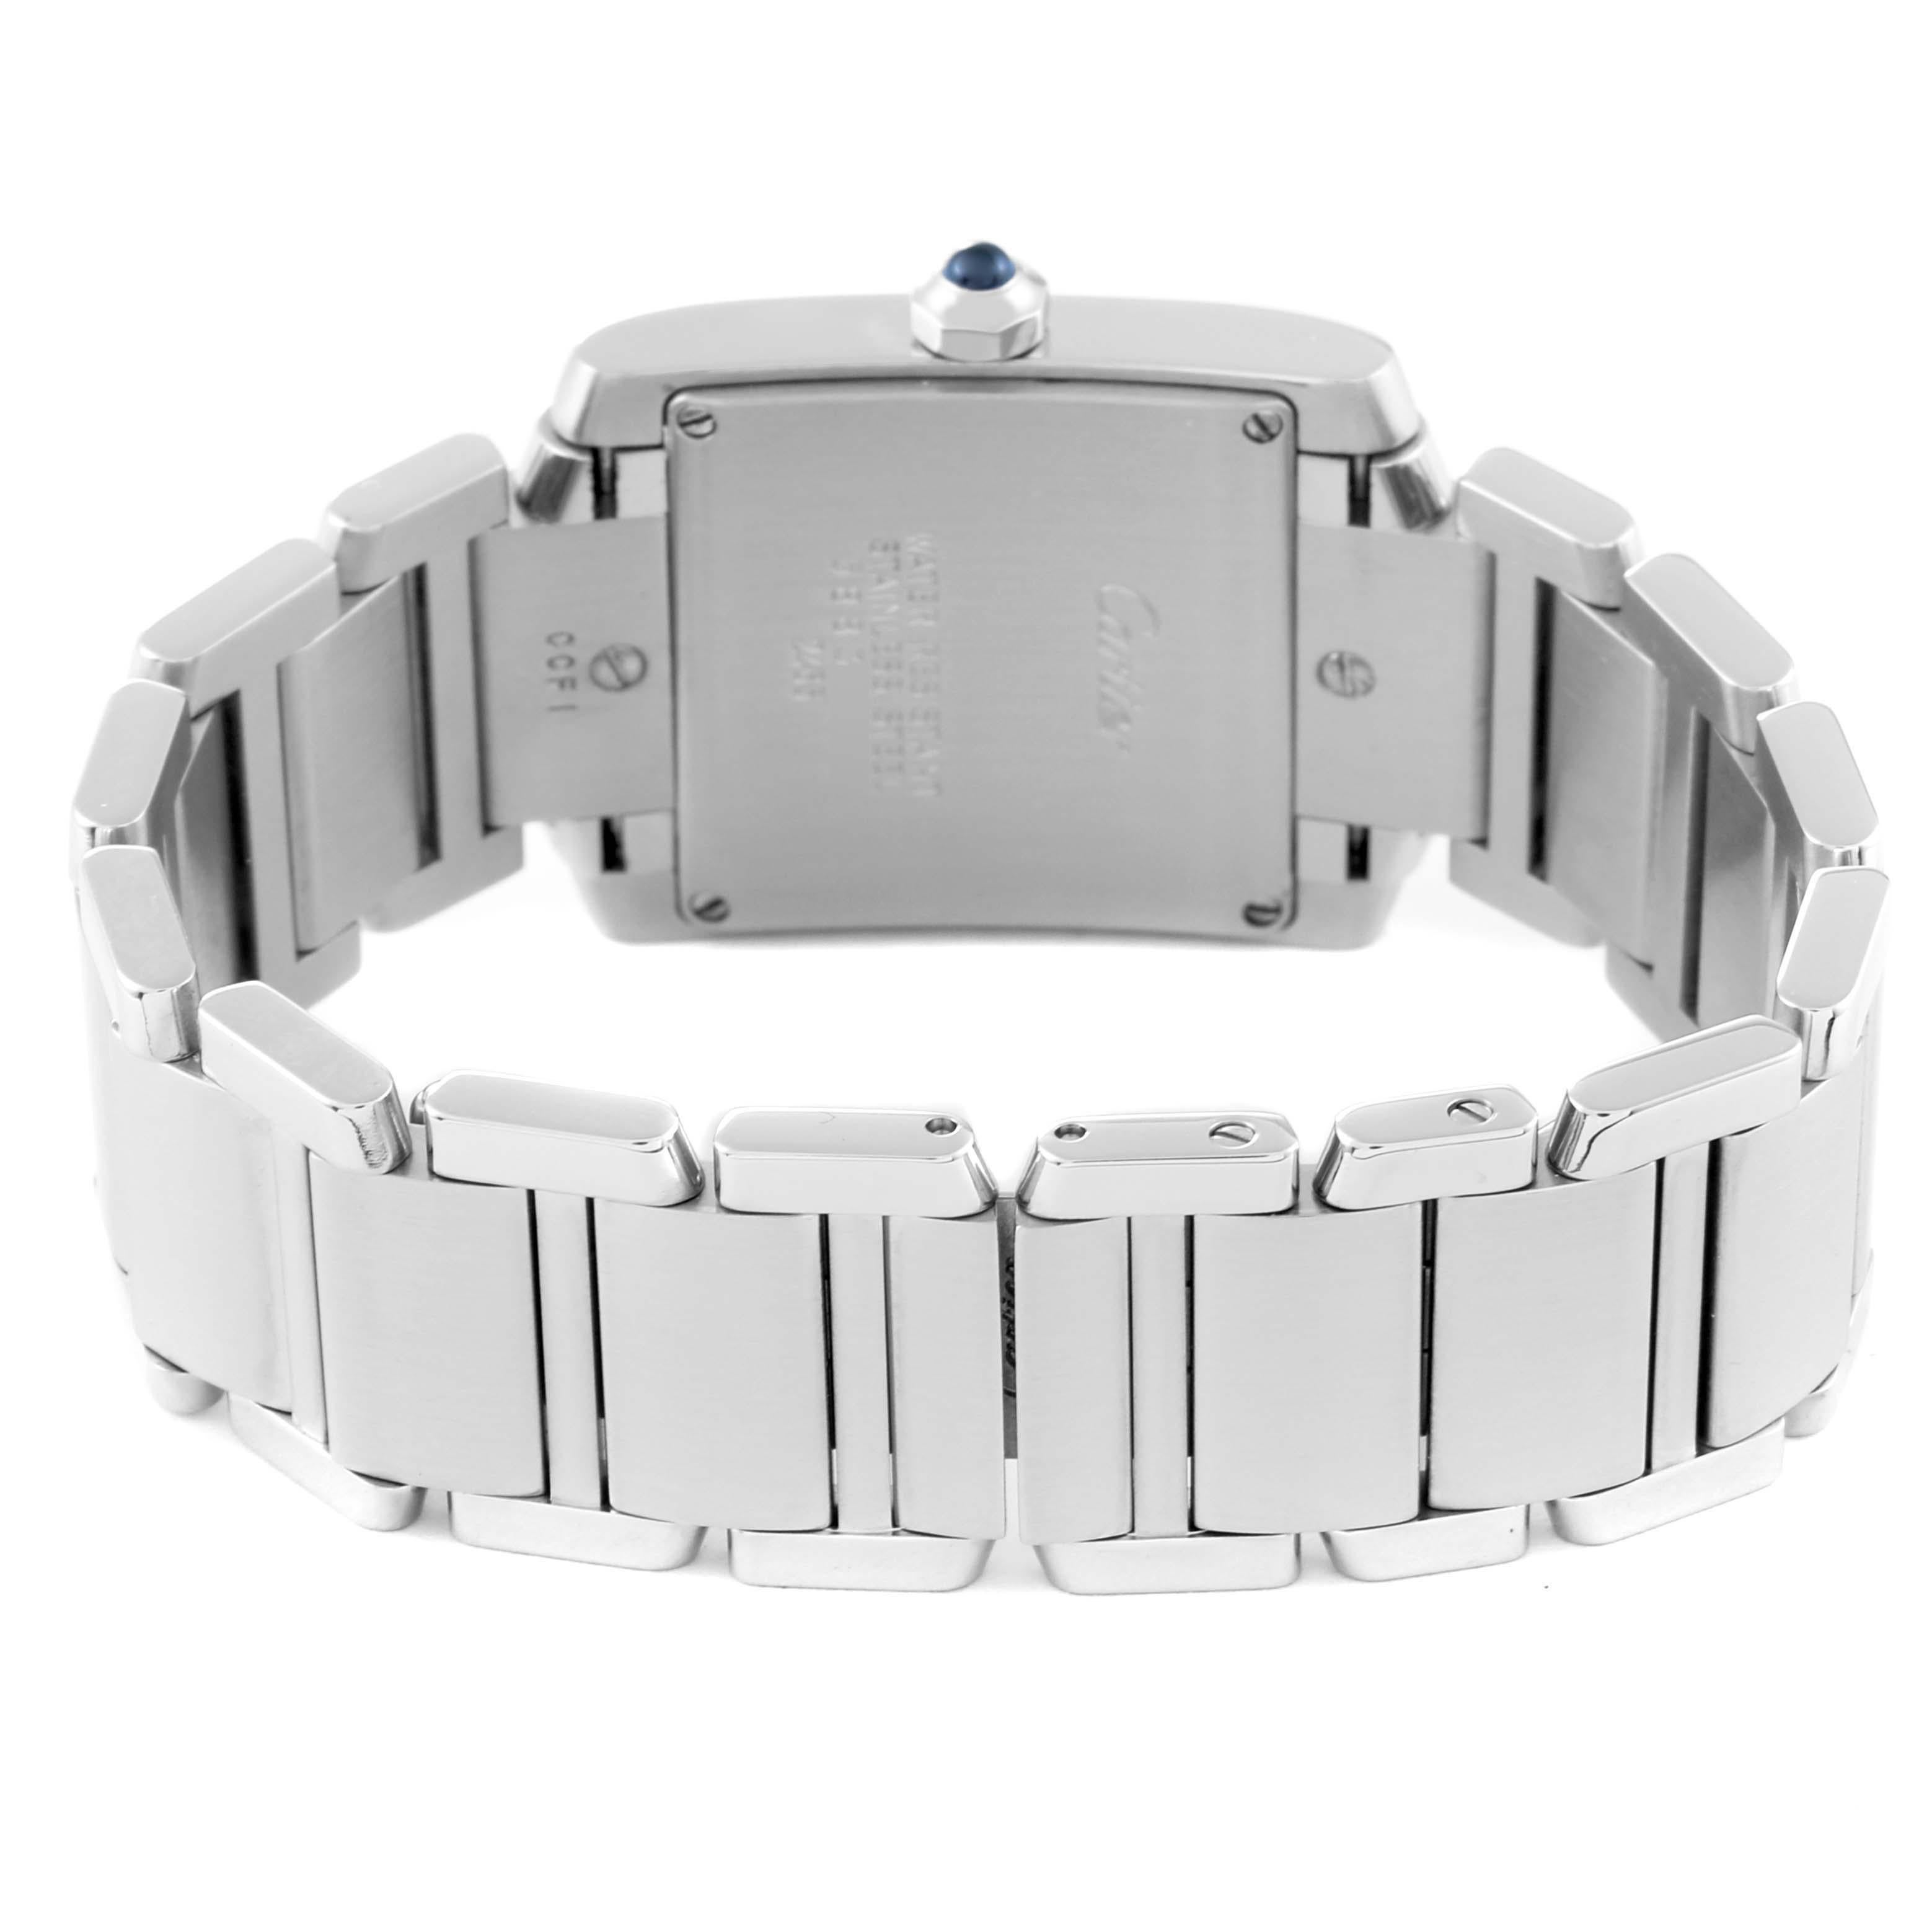 Cartier Tank Francaise Midsize Silver Dial Steel Ladies Watch W51011Q3 For Sale 3